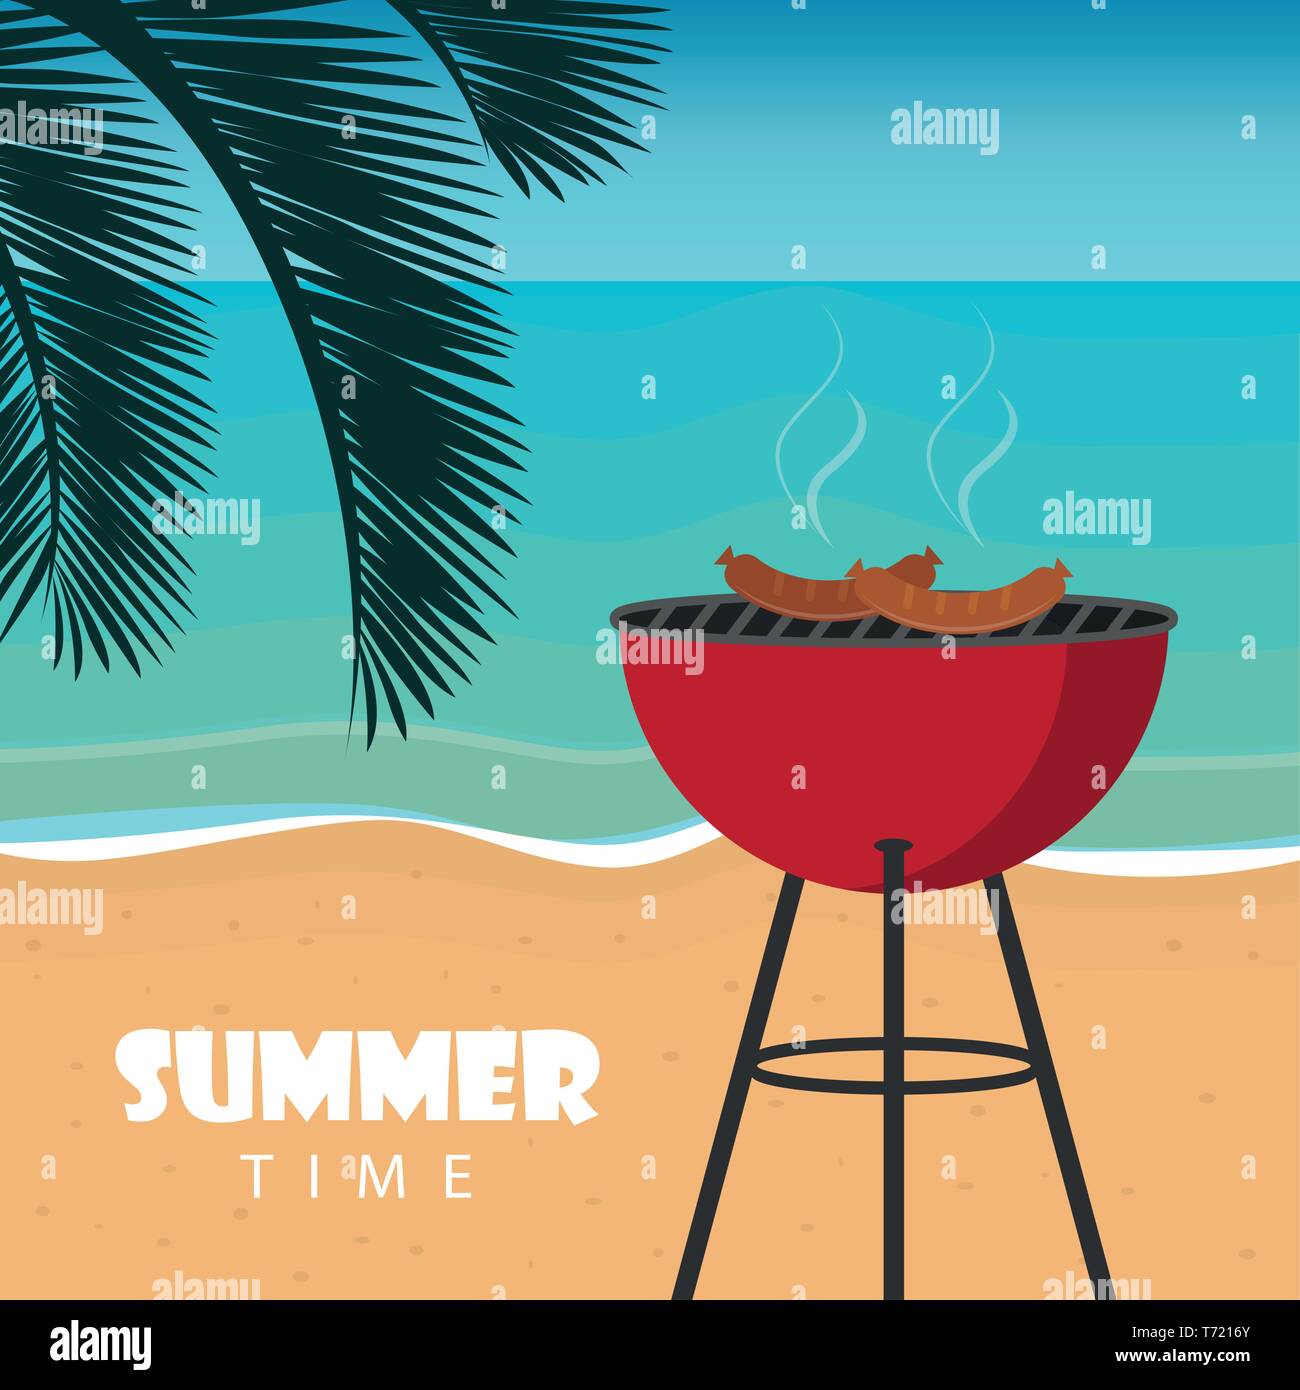 summer time barbeque on the beach with palm leaf vector illustration EPS10 Stock Vector